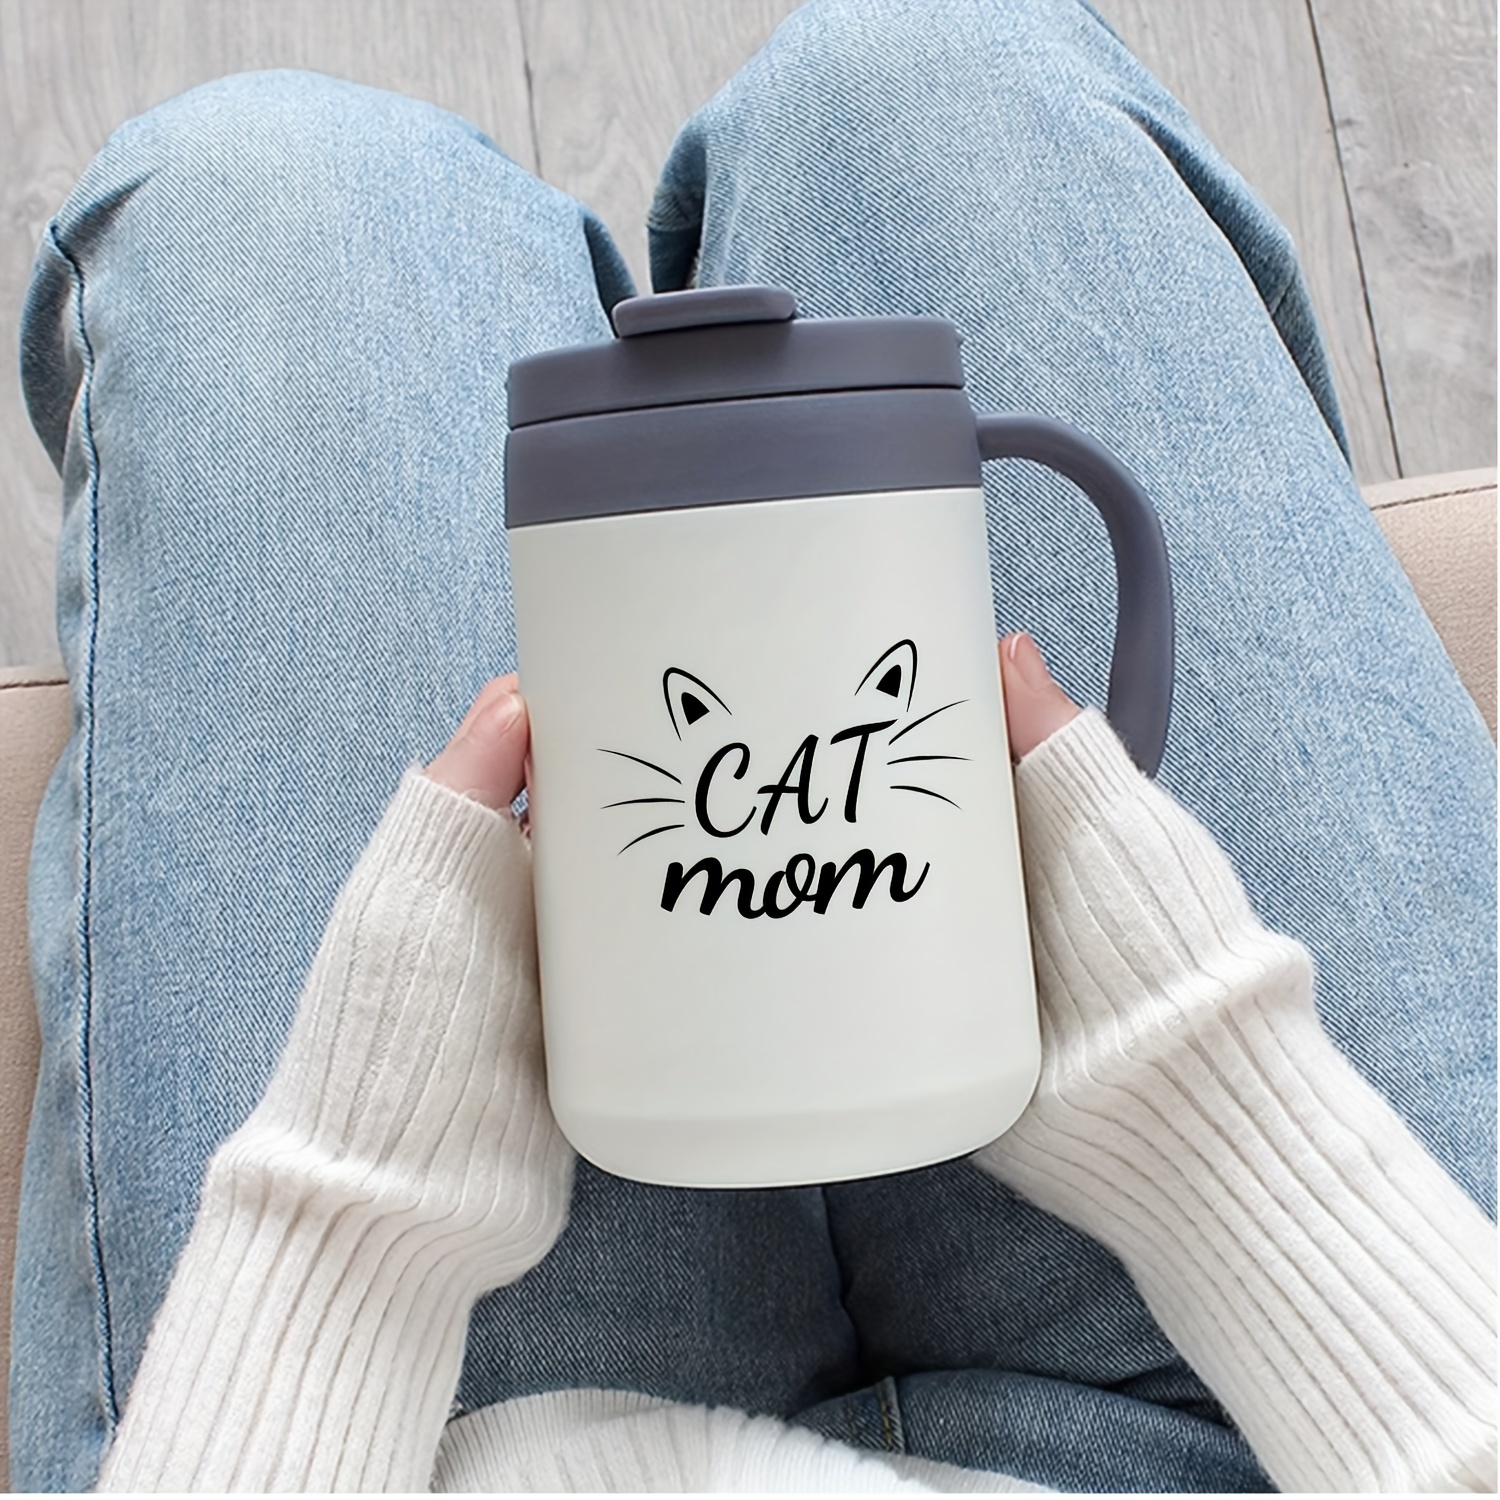 1pc, Best Mom Ever Coffee Mug, Insulated Travel Tea Mug With Handle And  Lid, Mom Mug For Birthday Gifts, Mother's Day Gifts, Party Favors